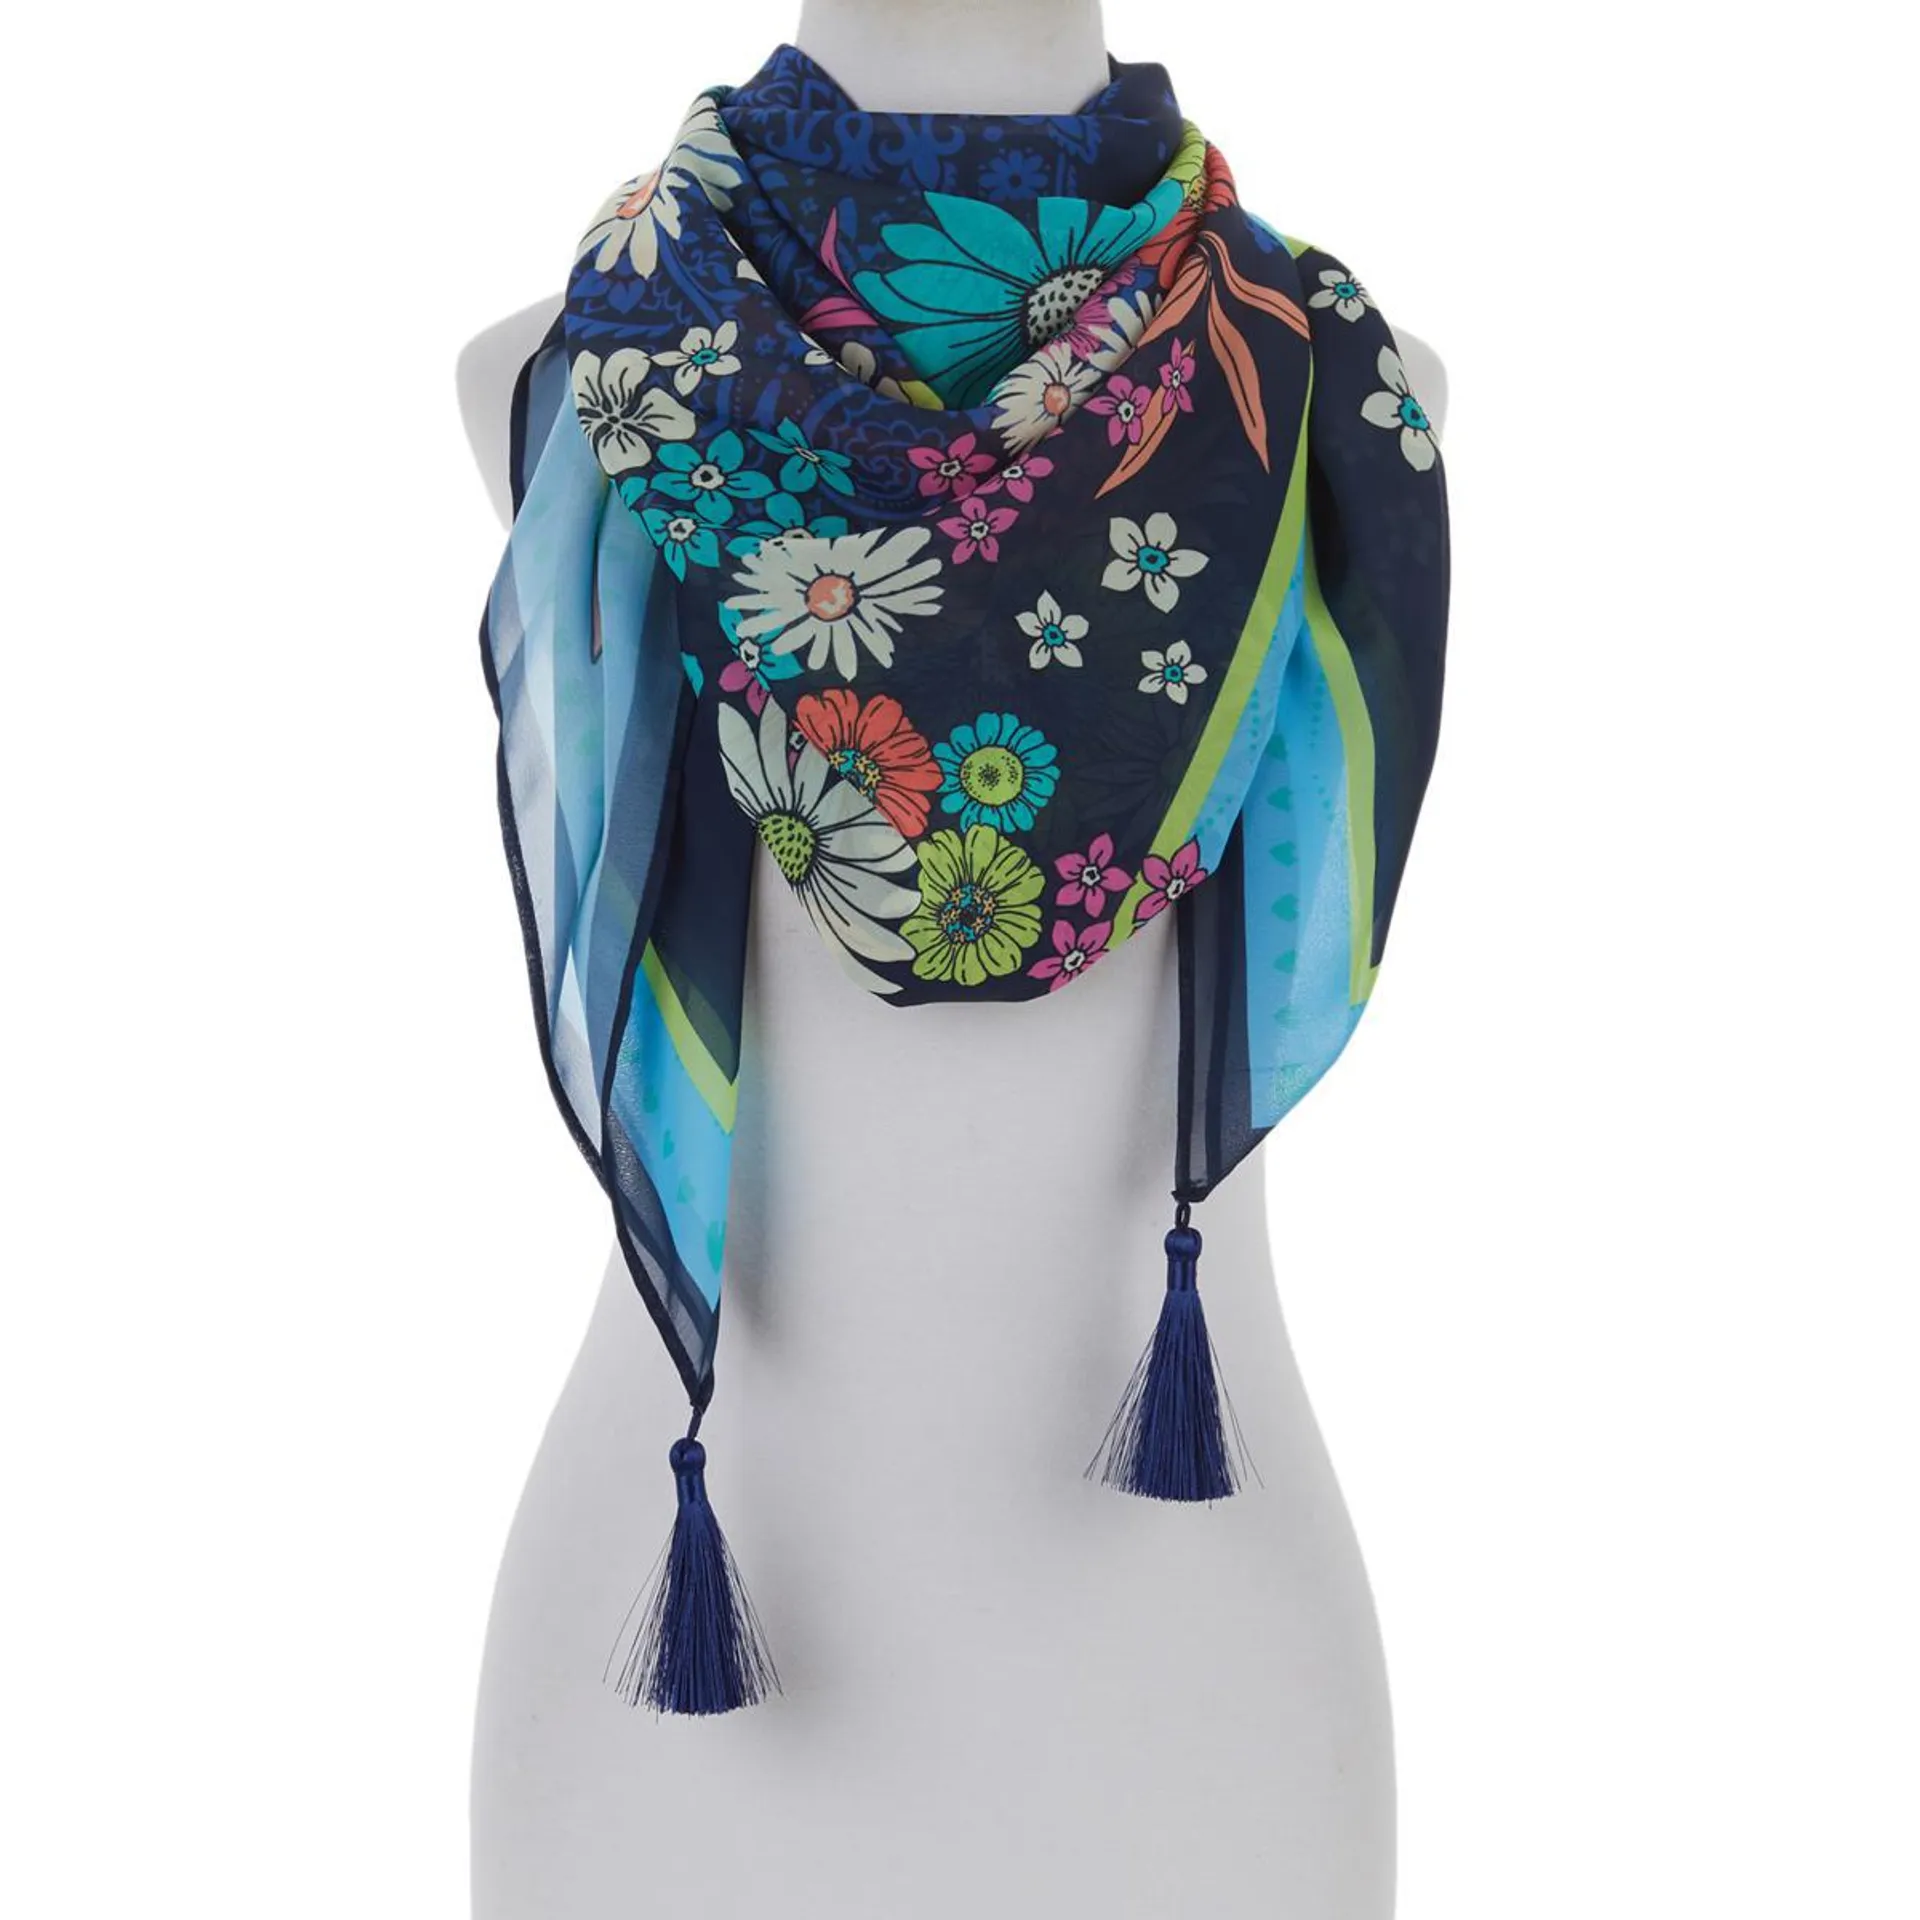 DG2 by Diane Gilman Printed Chiffon Square Scarf with Tassels